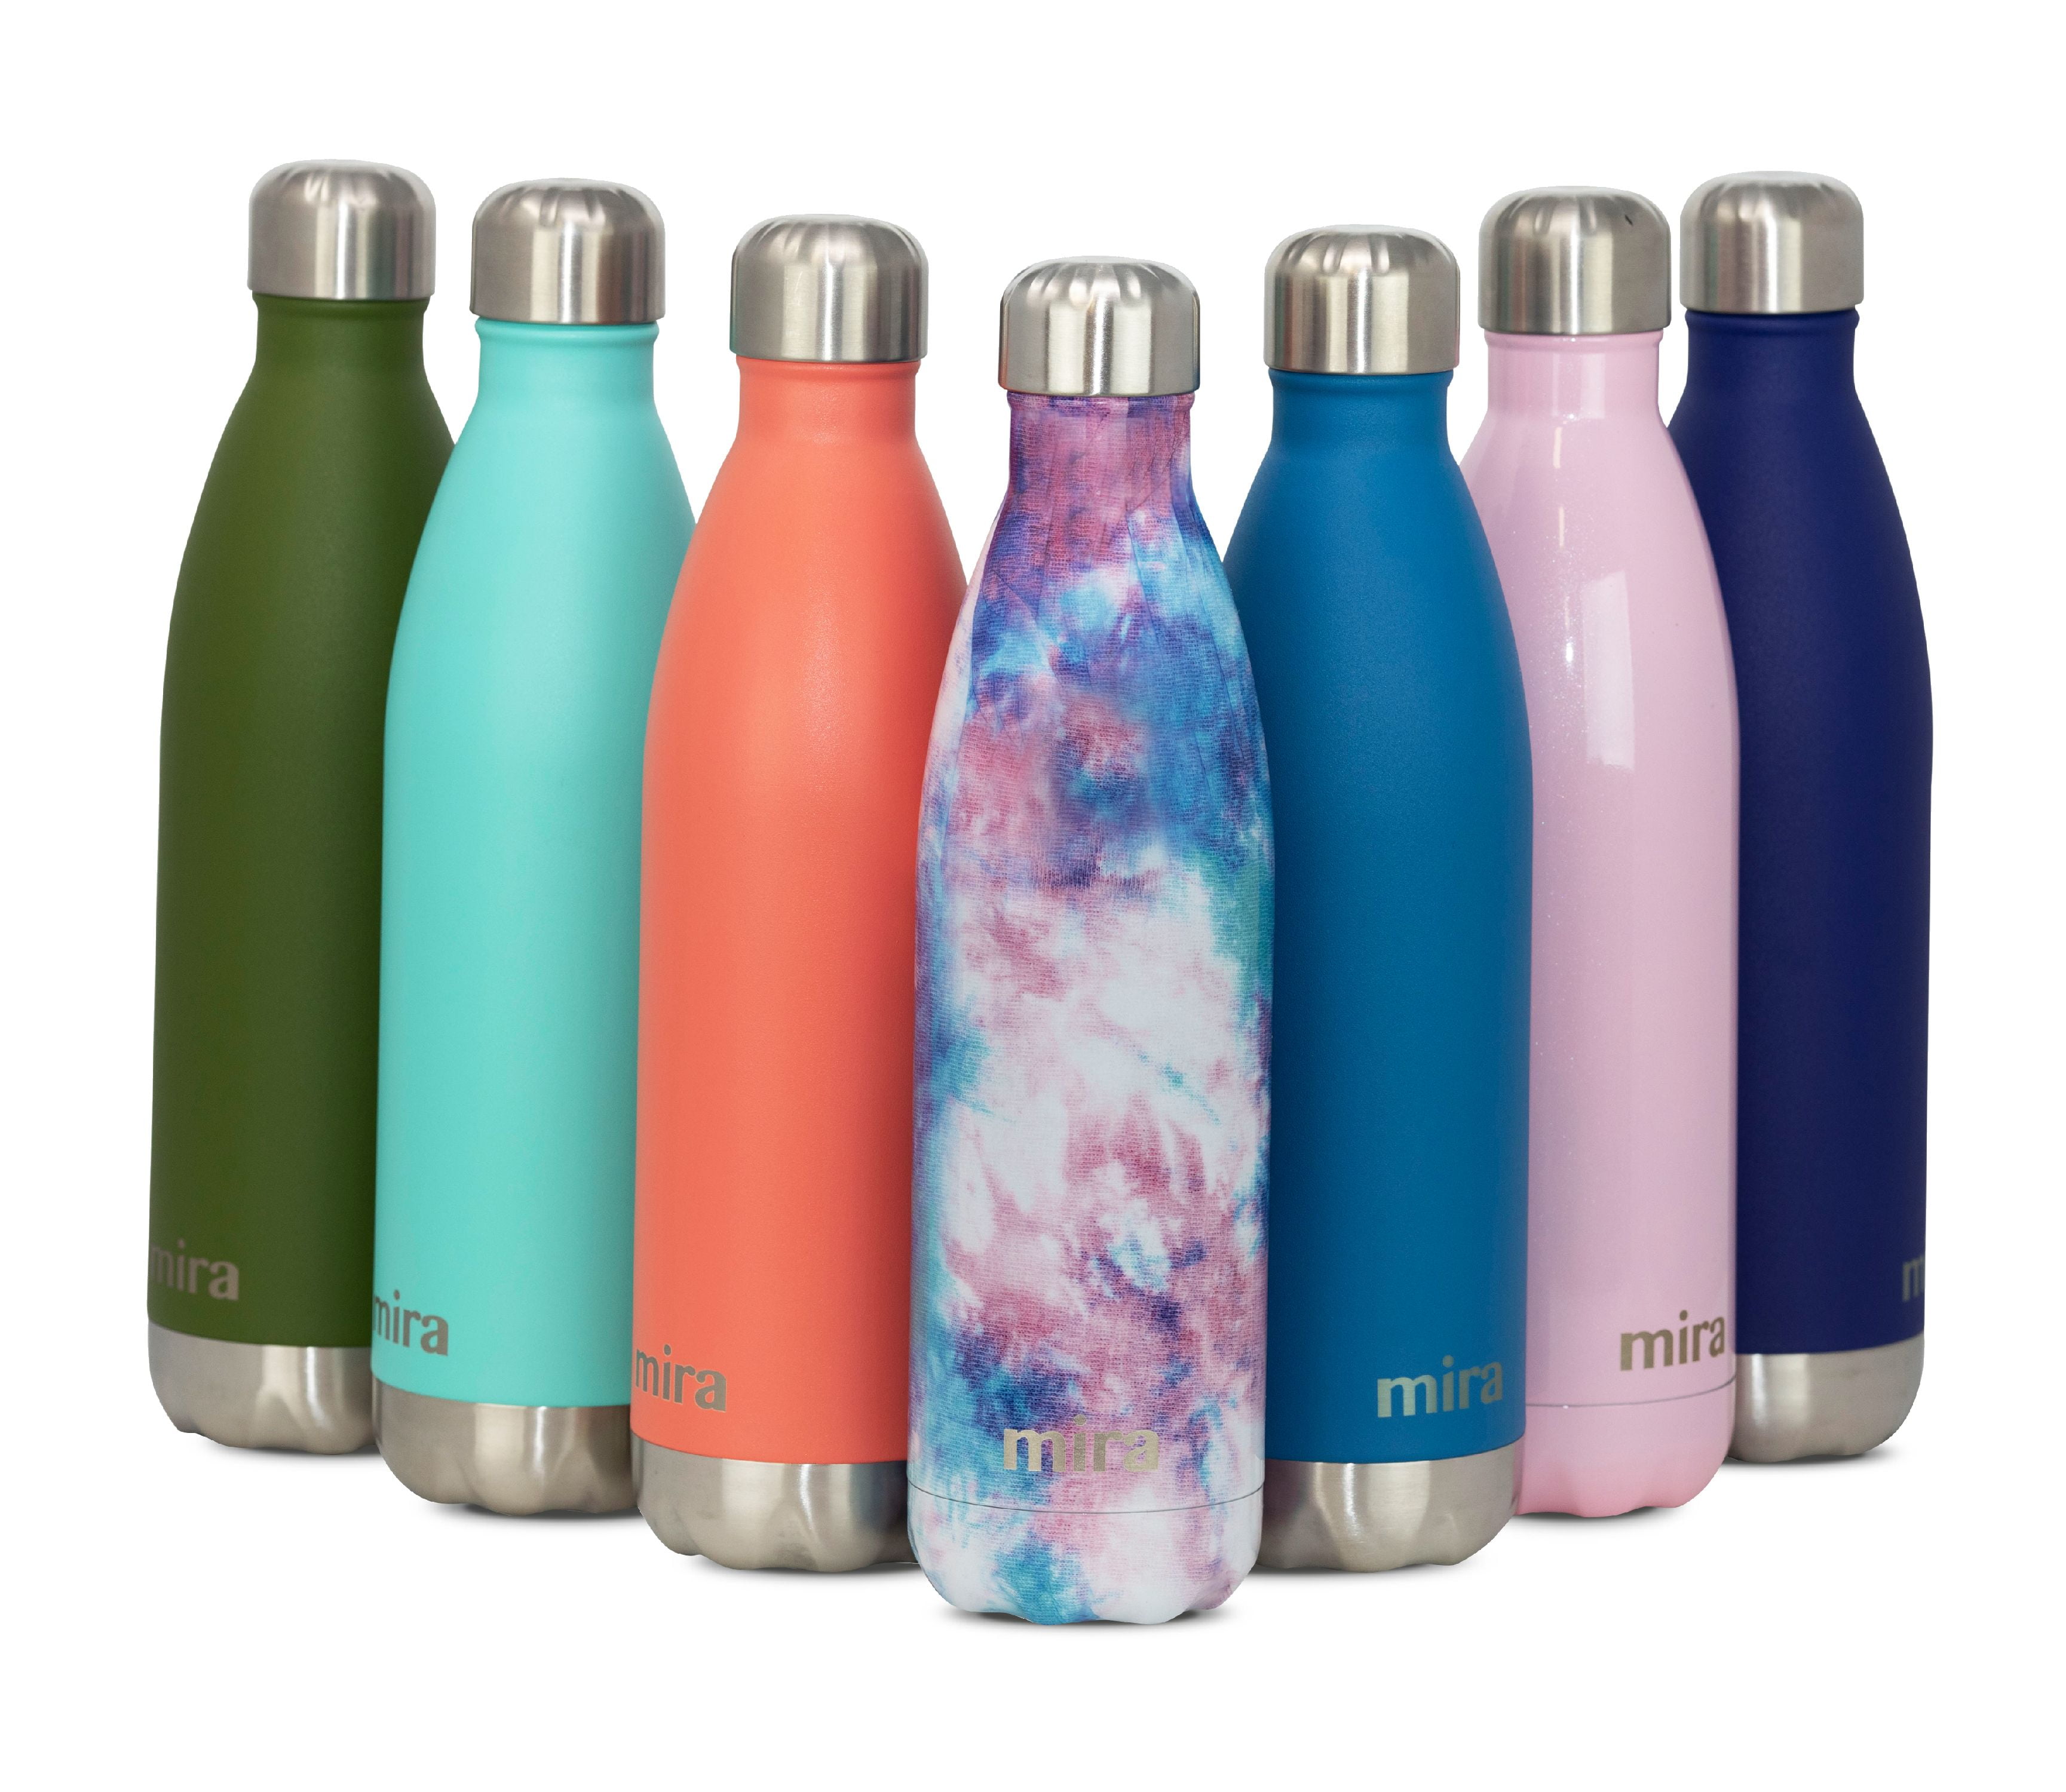 25oz Water Bottle and Performance Flask Double Walled and Insulated to Keep Water Hot or Cold